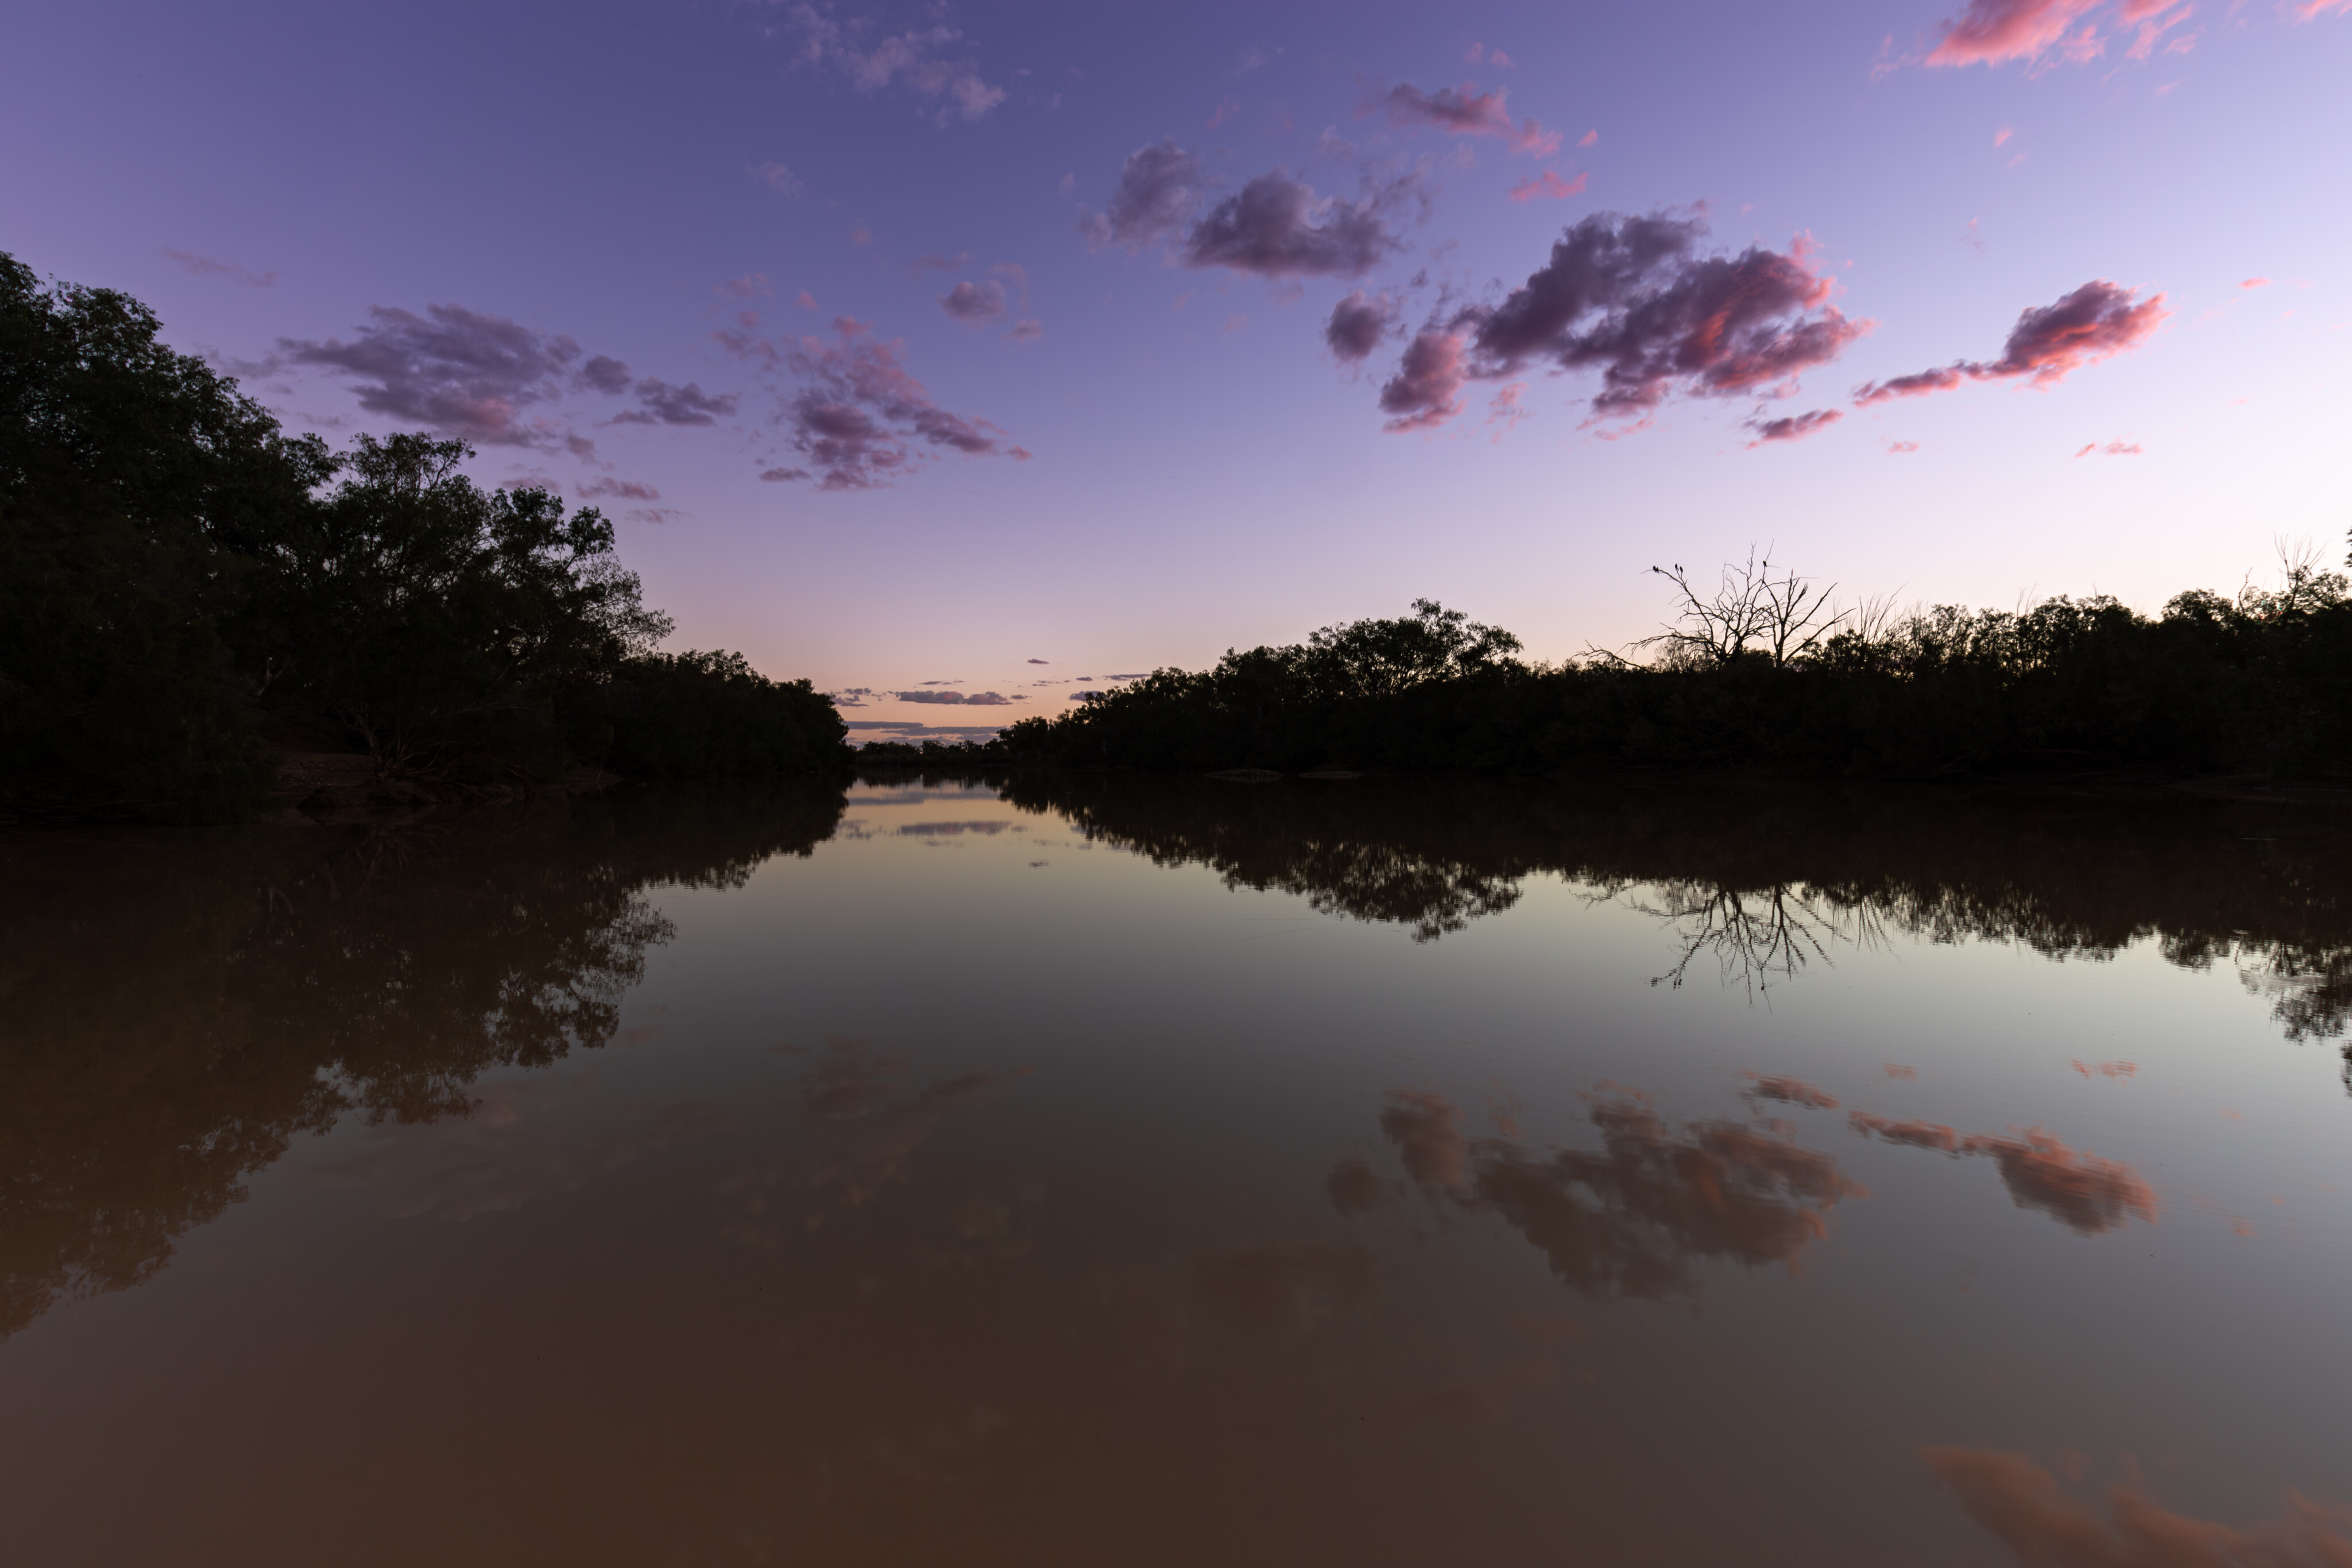 5a922845/explore queensland welford np life s hard when you get to watch the day end like this jpg